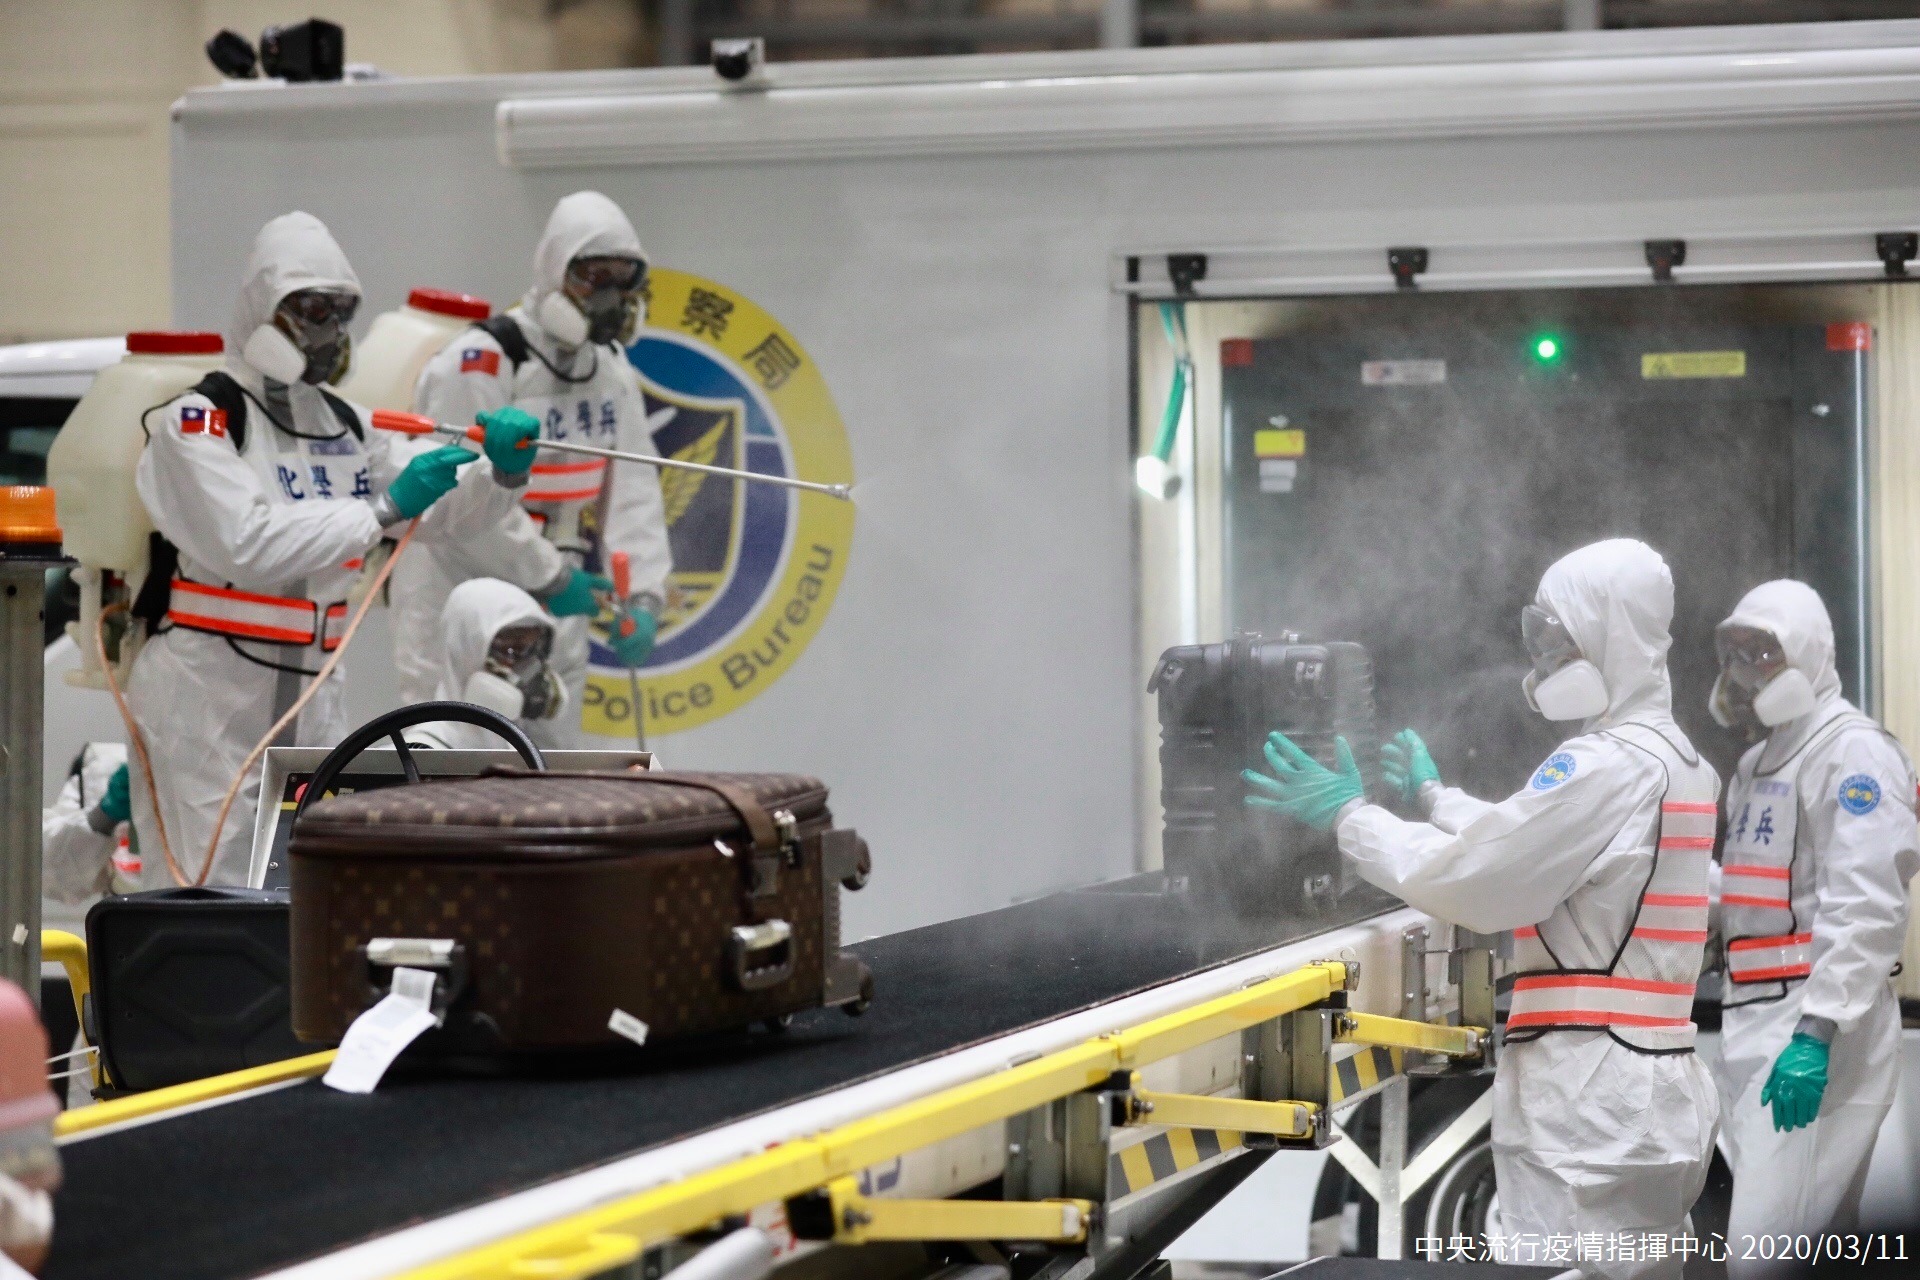 Personnel at the airport carry out disinfection of passengers' luggage.